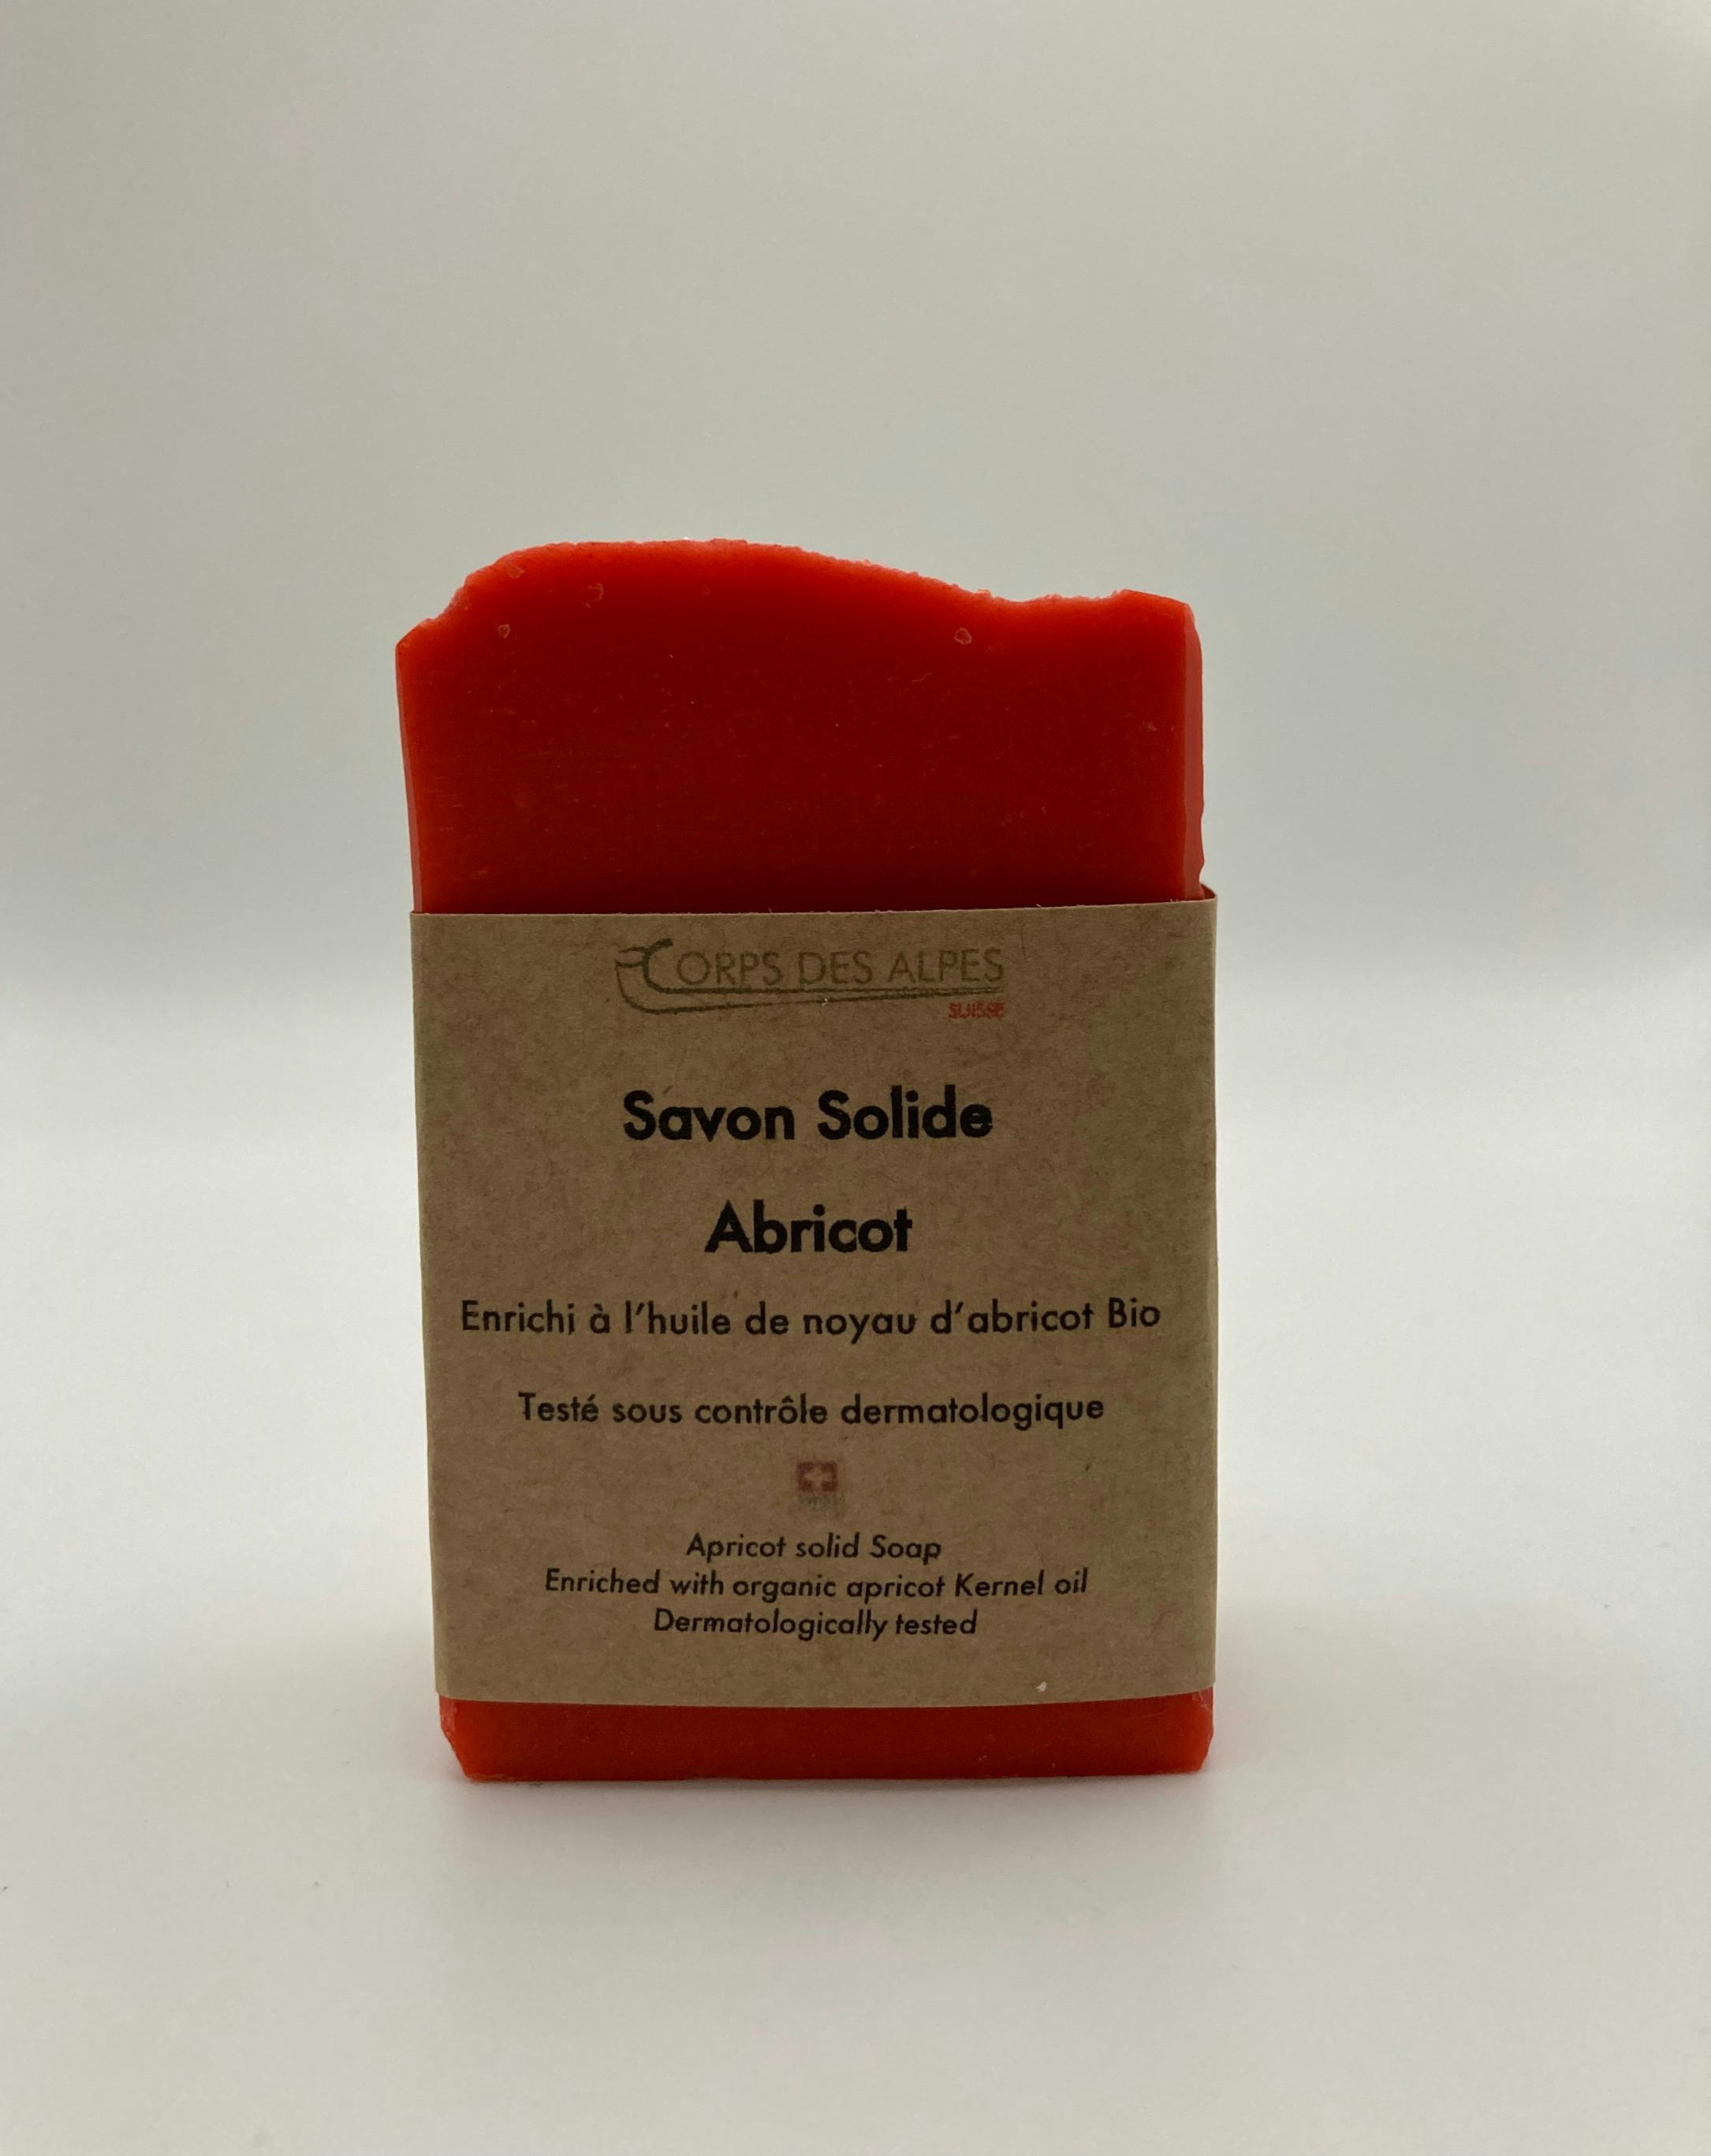 Savon Solide Abricot, artisanal product for direct sale in Switzerland